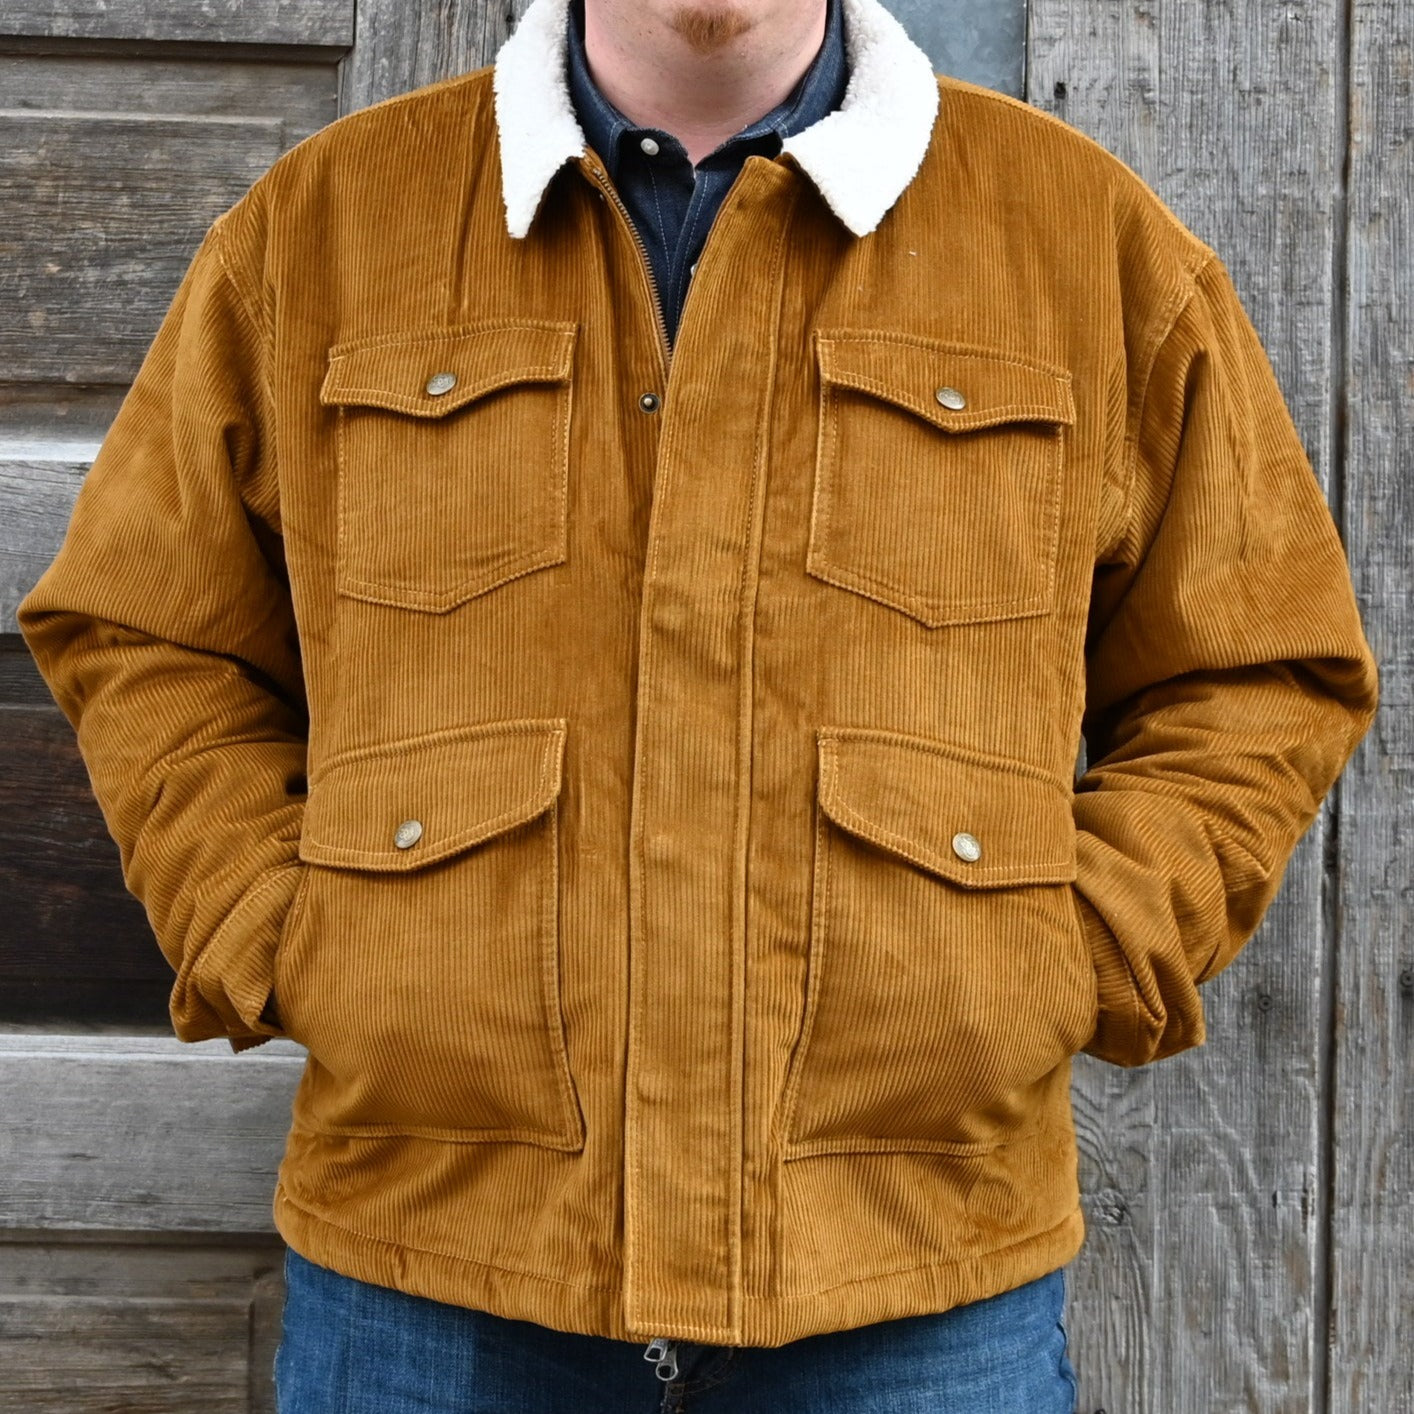 Schaefer Cody Jacket in Brown view of front of jacket on model size XL